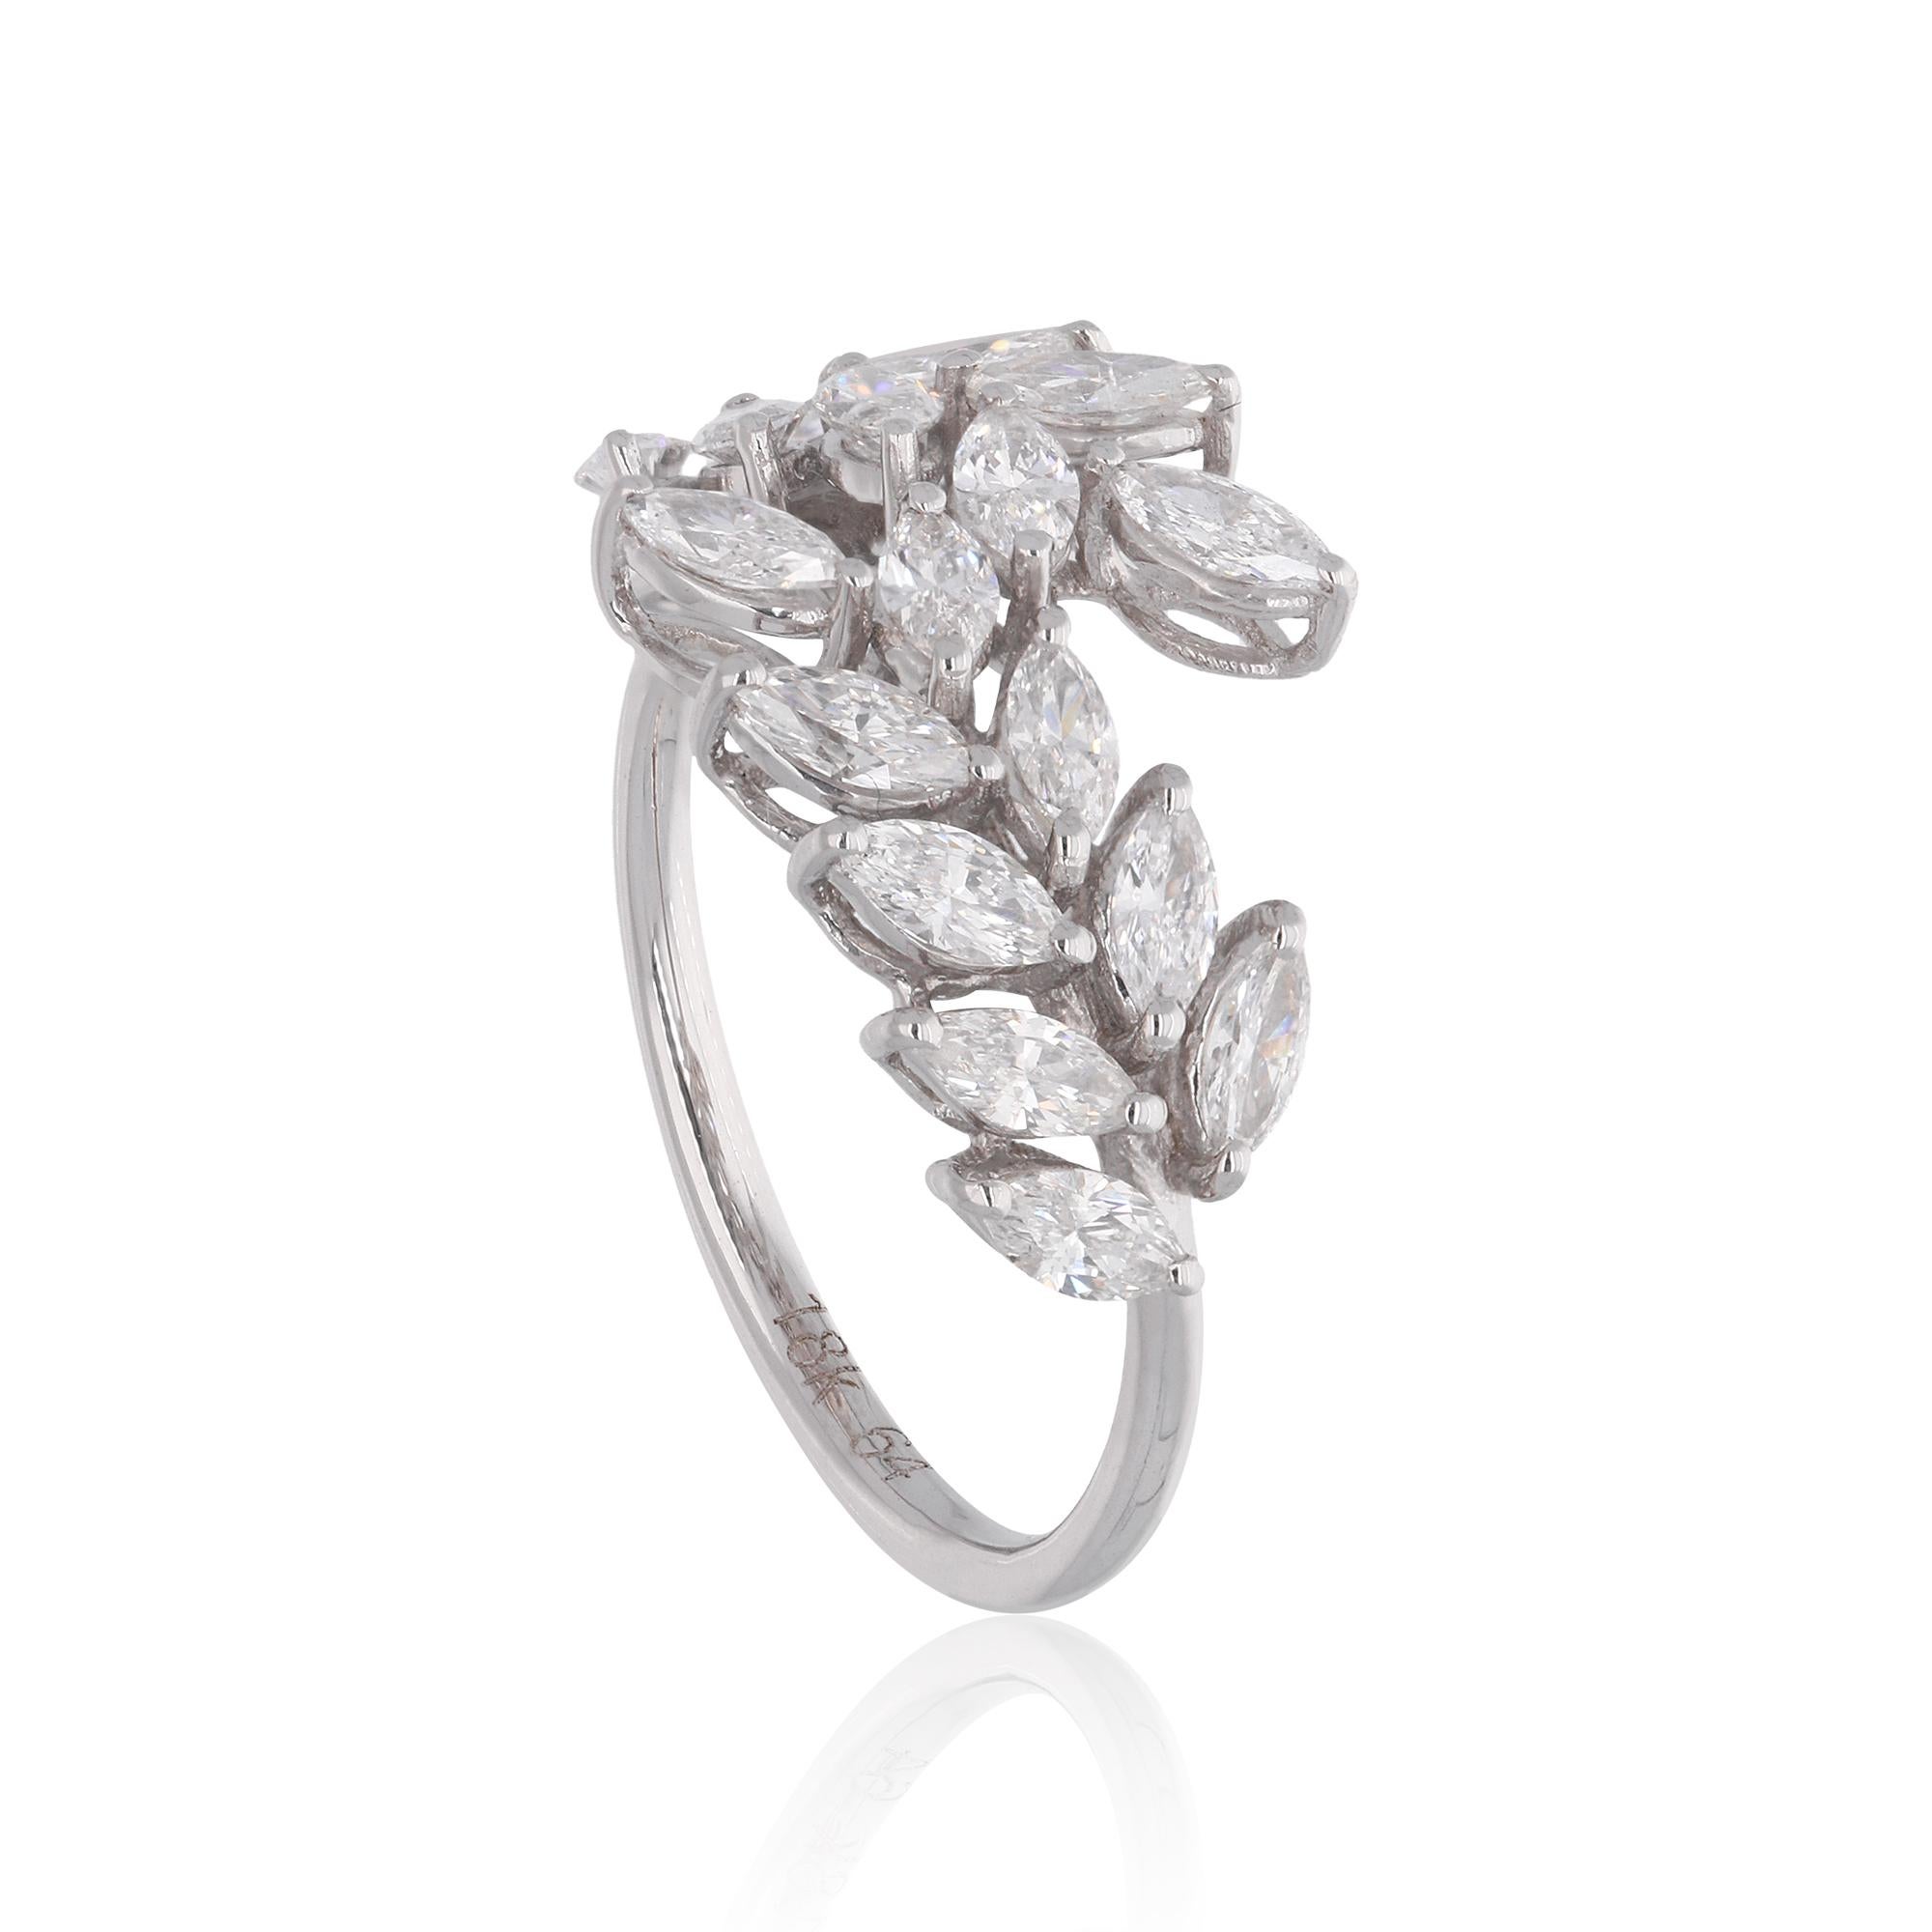 For Sale:  1.34 Carat SI Clarity HI Color Marquise Diamond Leaf Ring 18 Karat White Gold 5